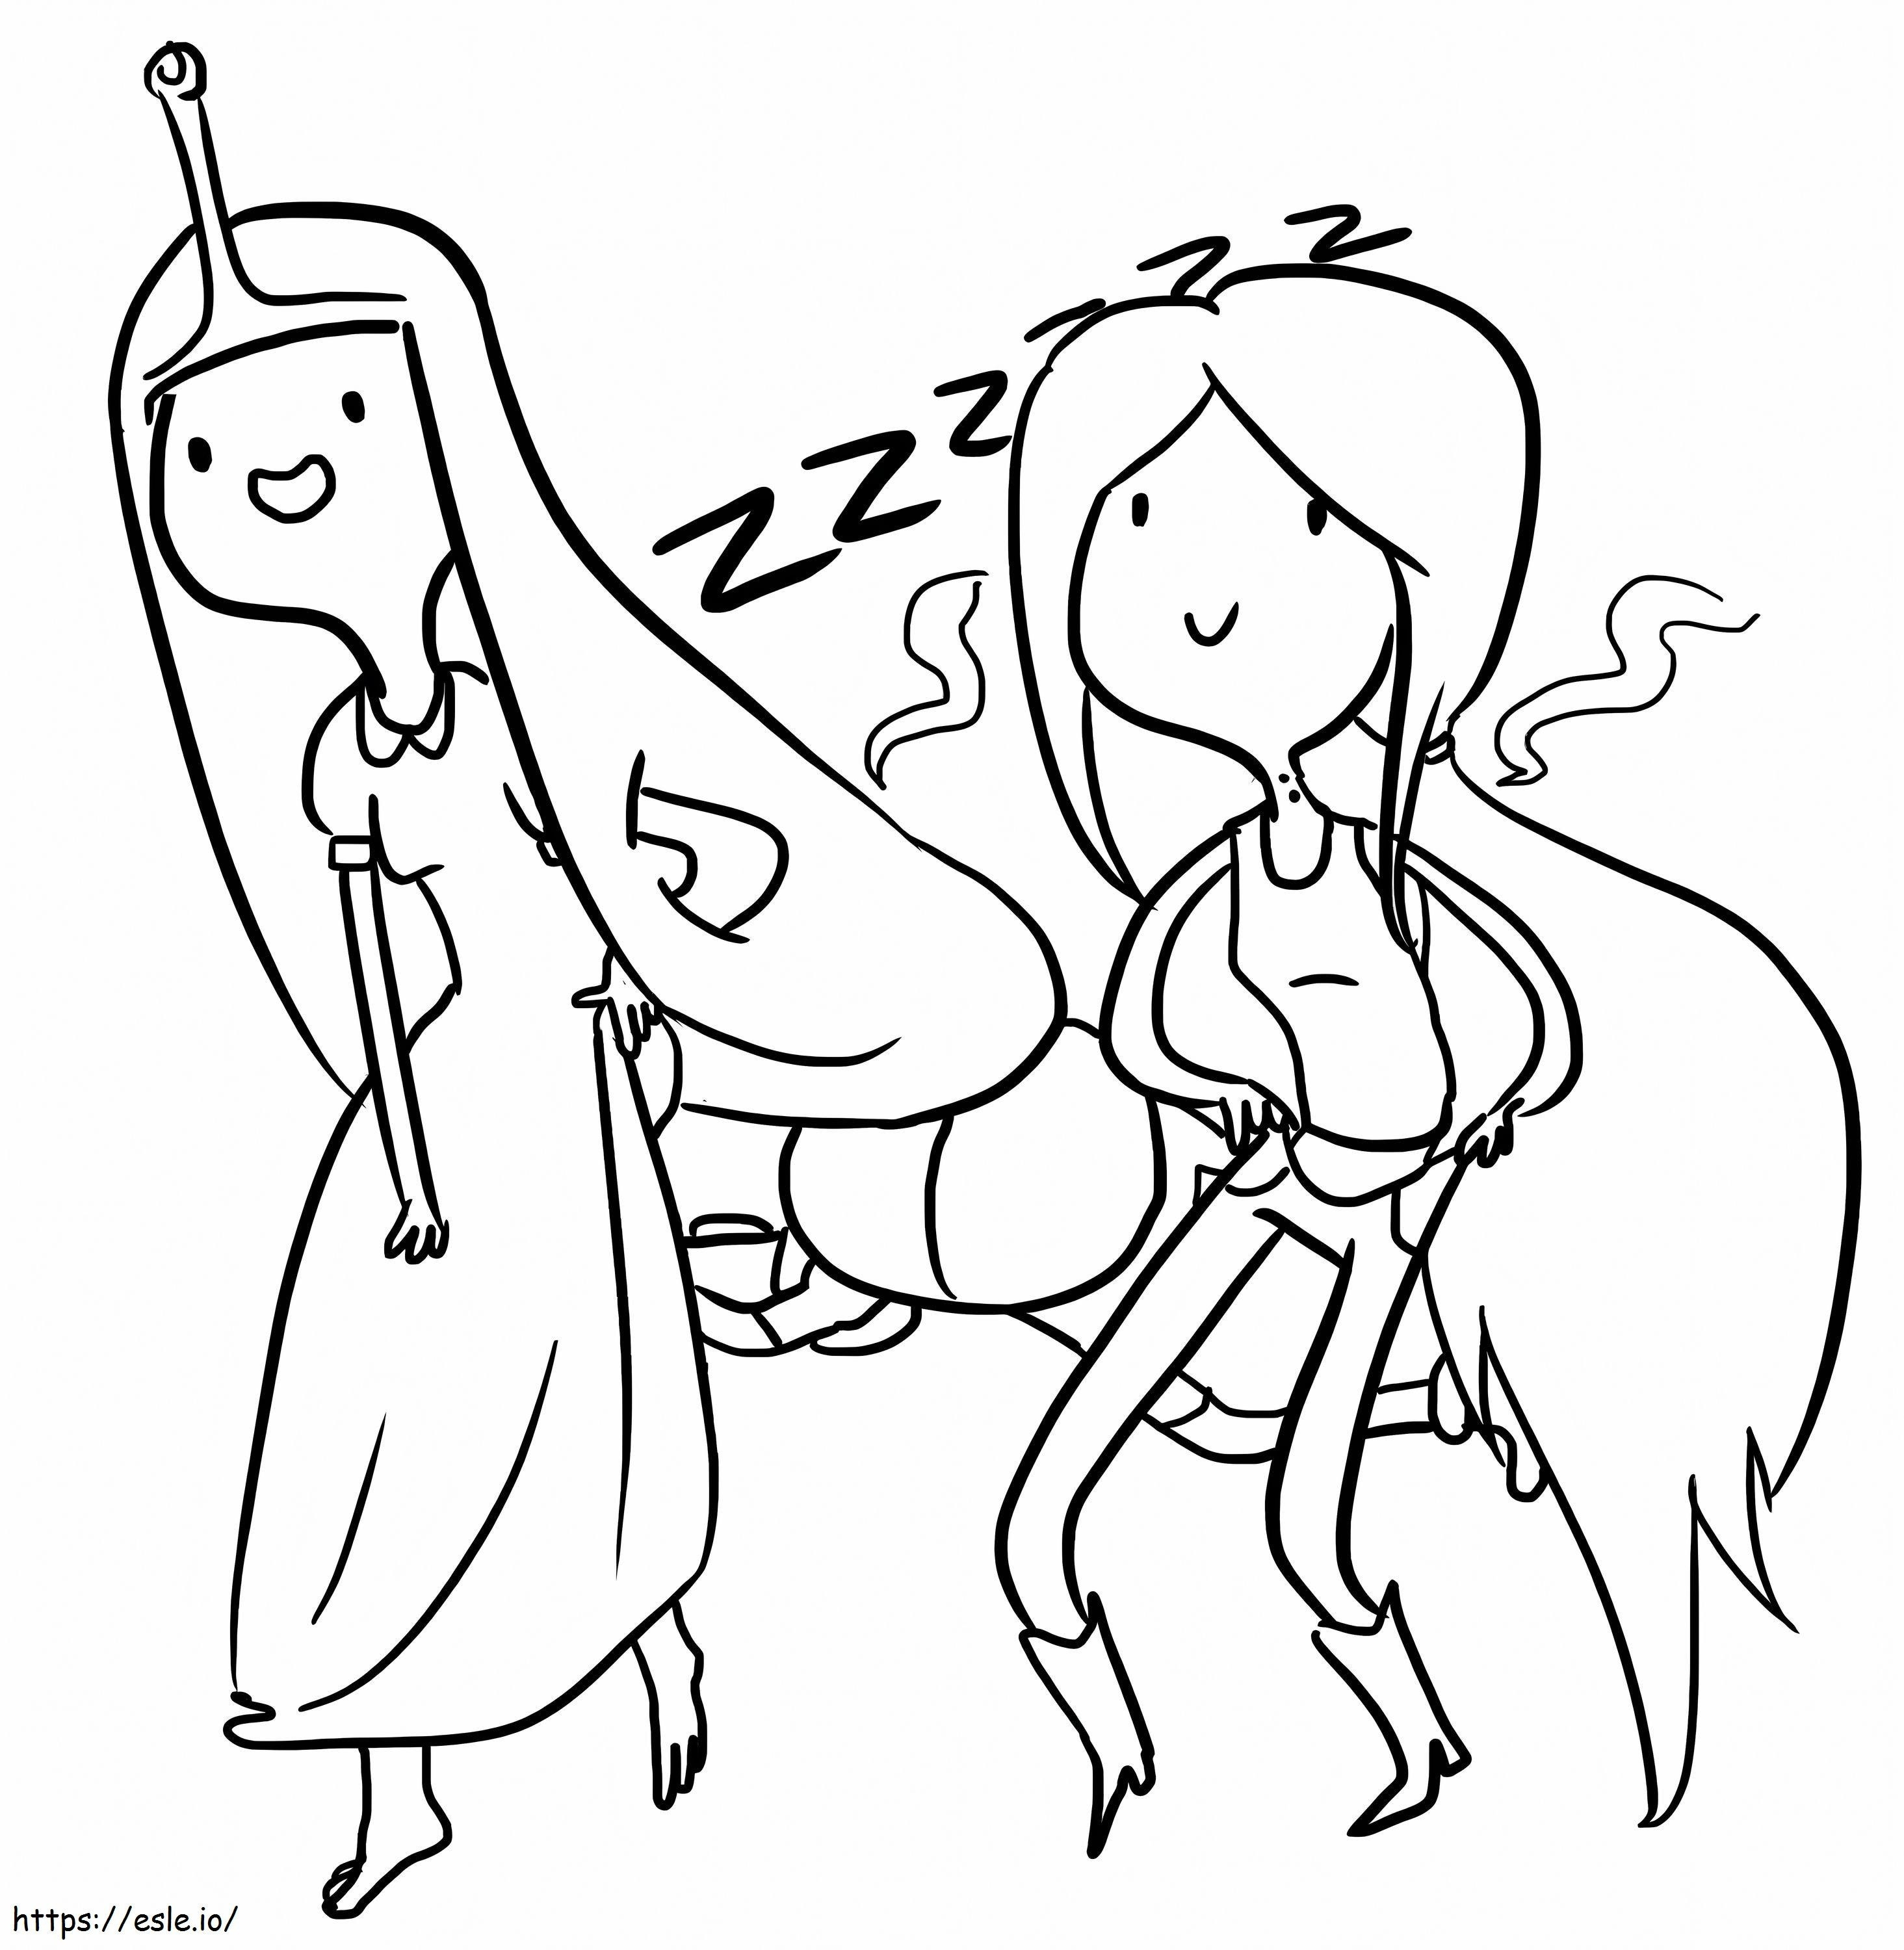 Awesome Princess Bubblegum And Friend coloring page